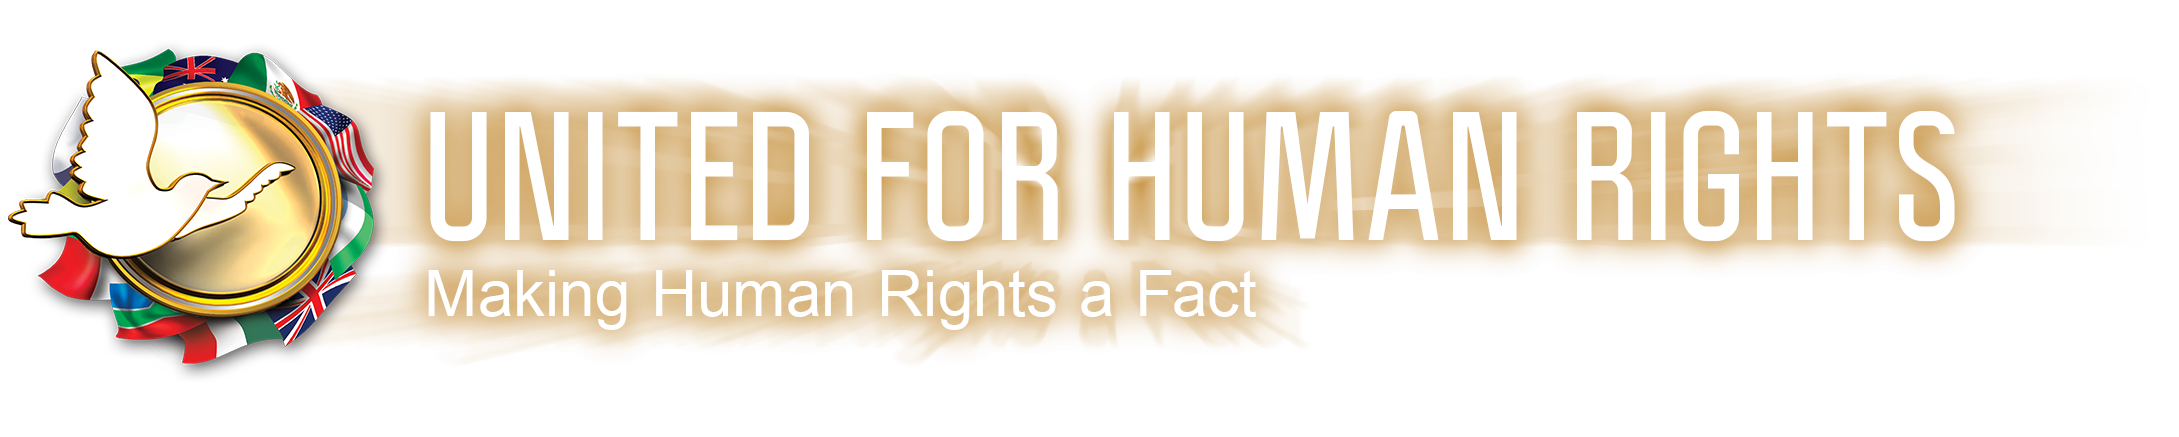 United for Human Rights